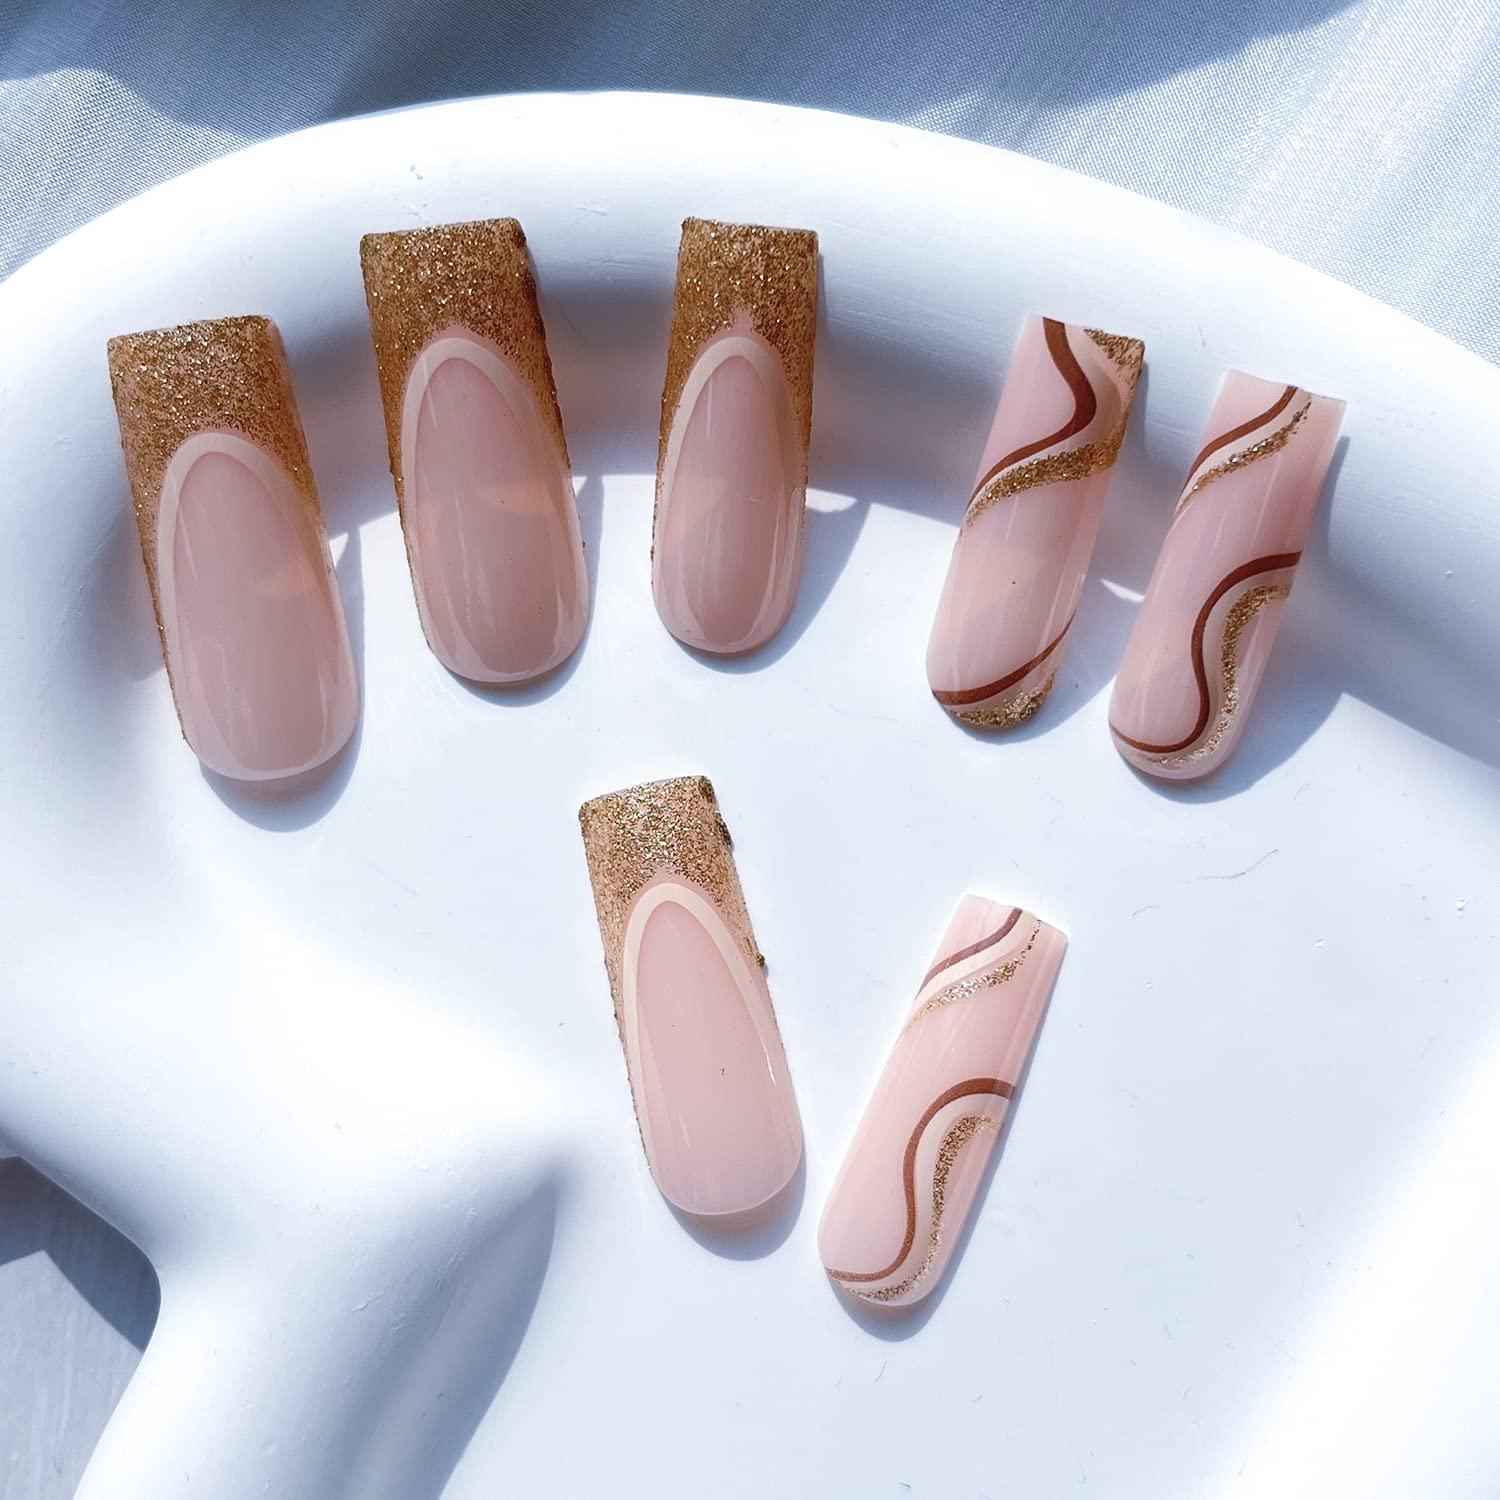 41 Pretty Nail Art Design Ideas To Jazz Up The Season : Rose gold glitter  French tips